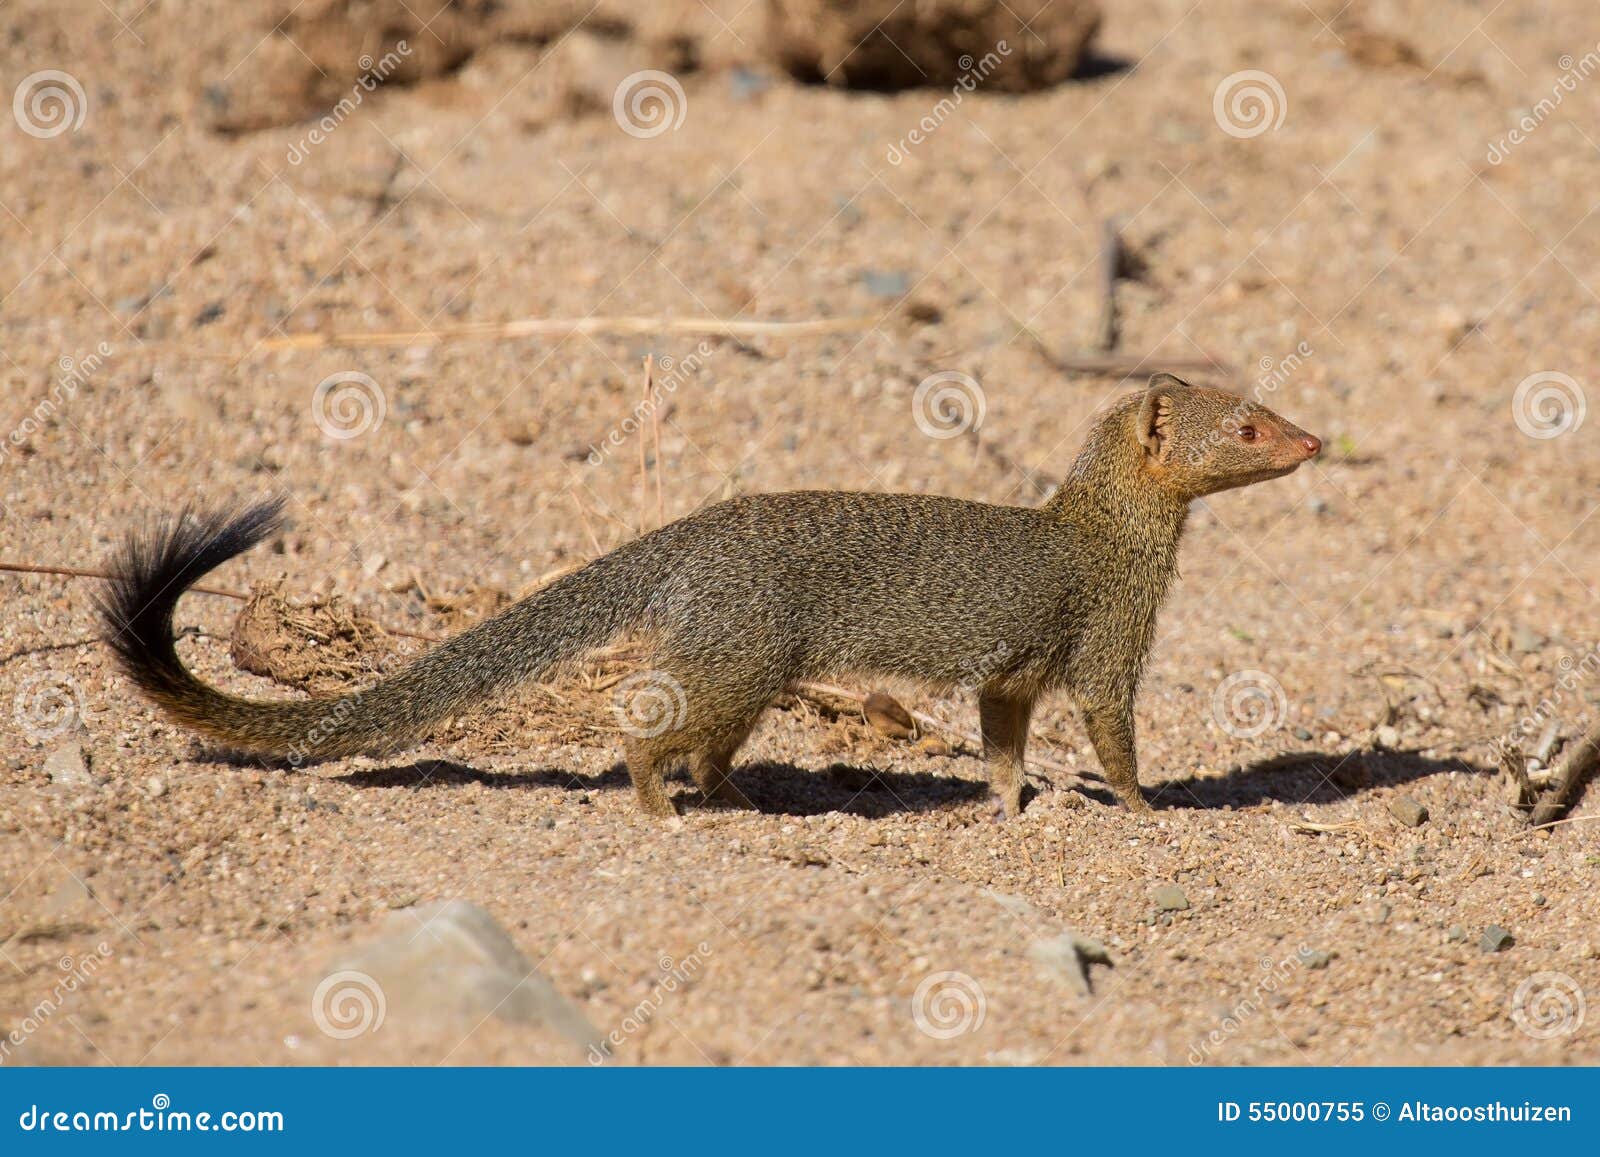 slender mongoose forage and look for food at rocks